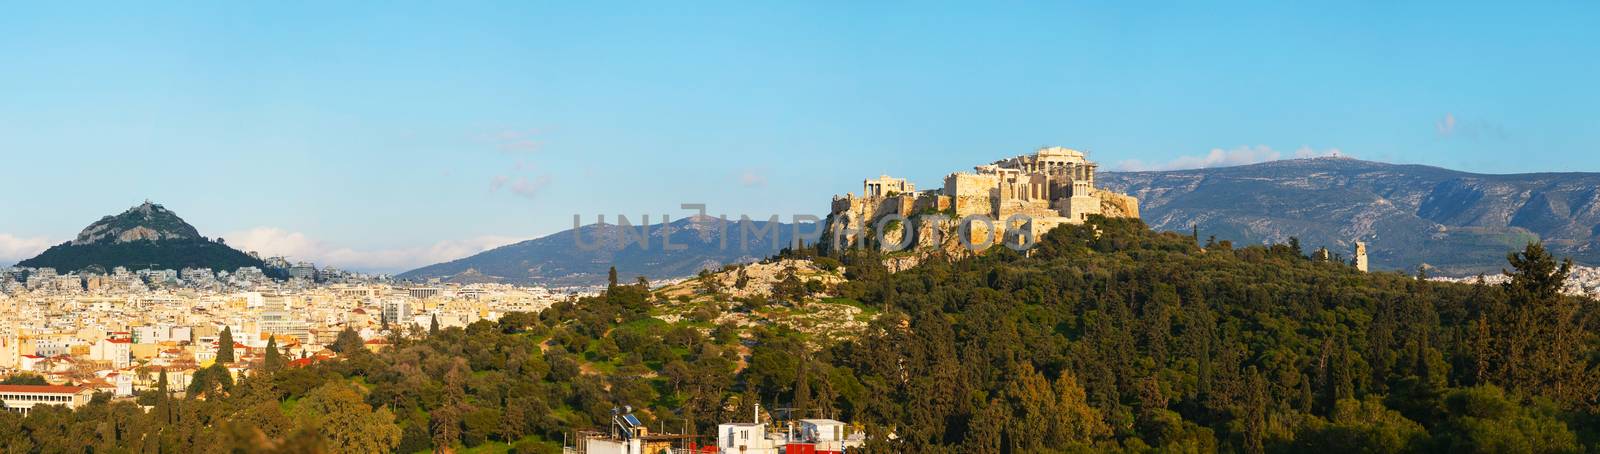 Panorama with Acropolis in Athens, Greece on a sunny day